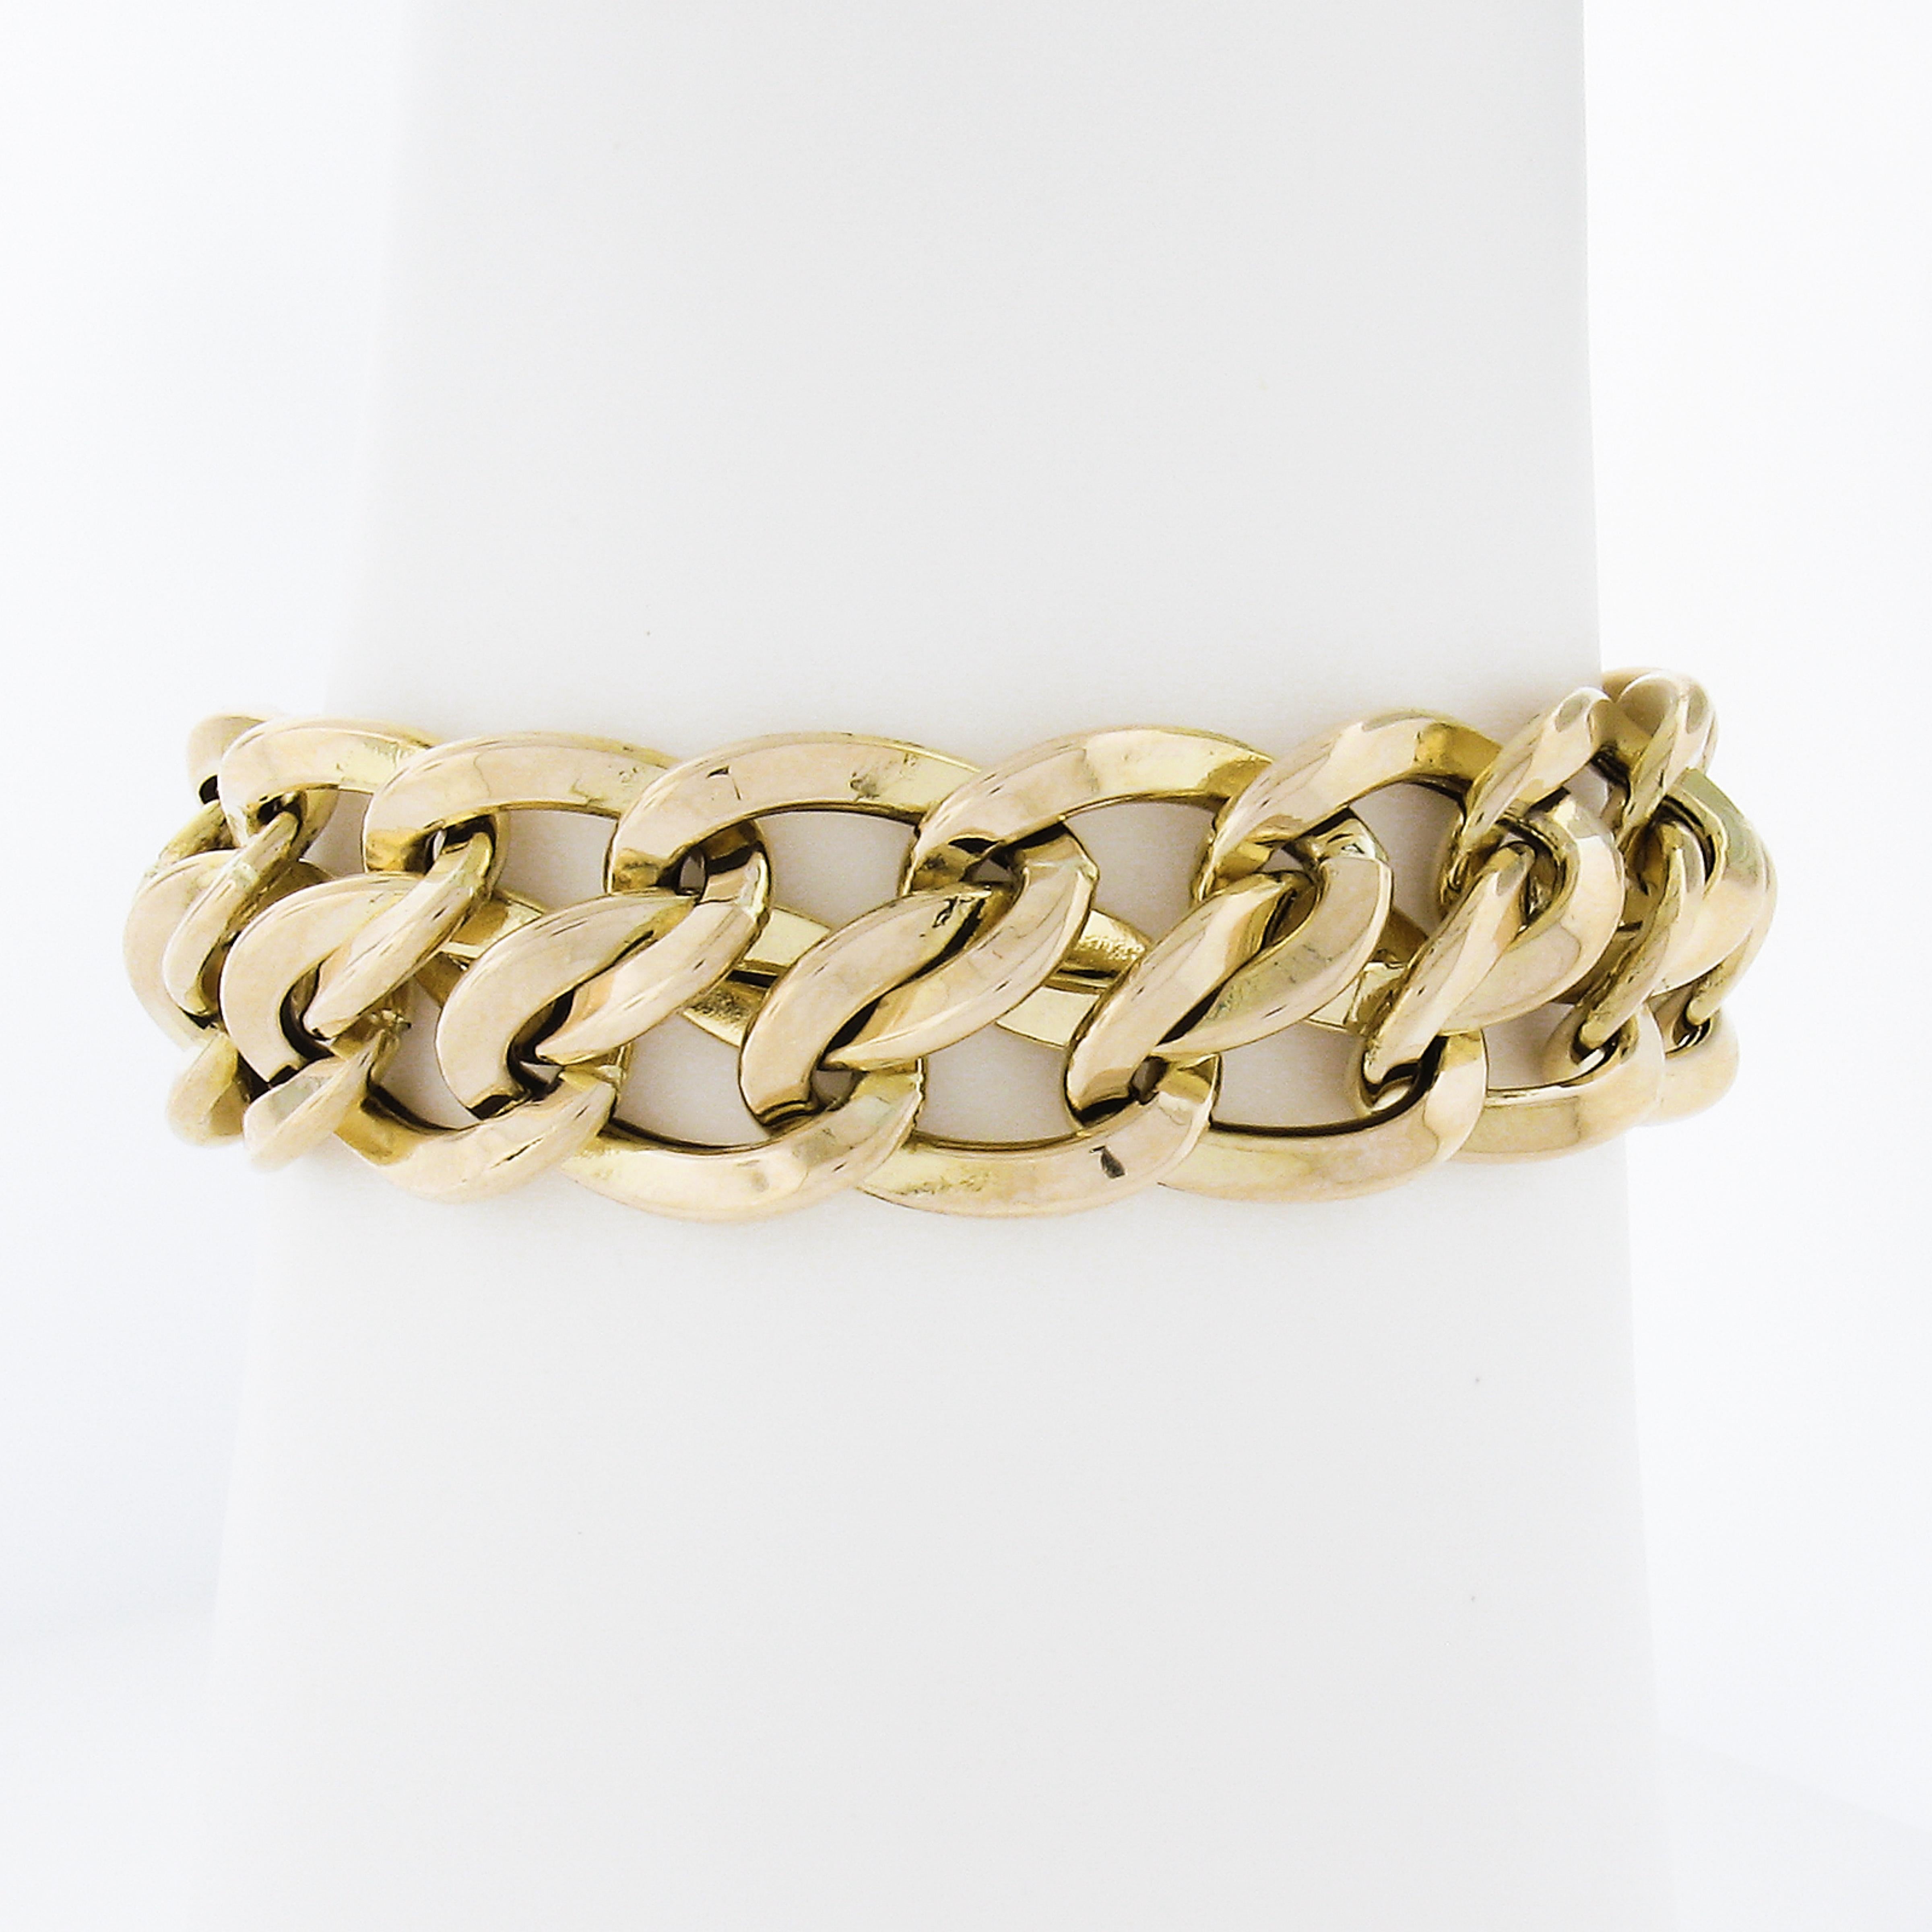 This Italian UnoAErre interlocking link statement chain bracelet is crafted from solid 14k yellow gold. It features a wide polished finish elegant design. The bracelet is in excellent condition! A substantial look on the wrist. Hollow design but